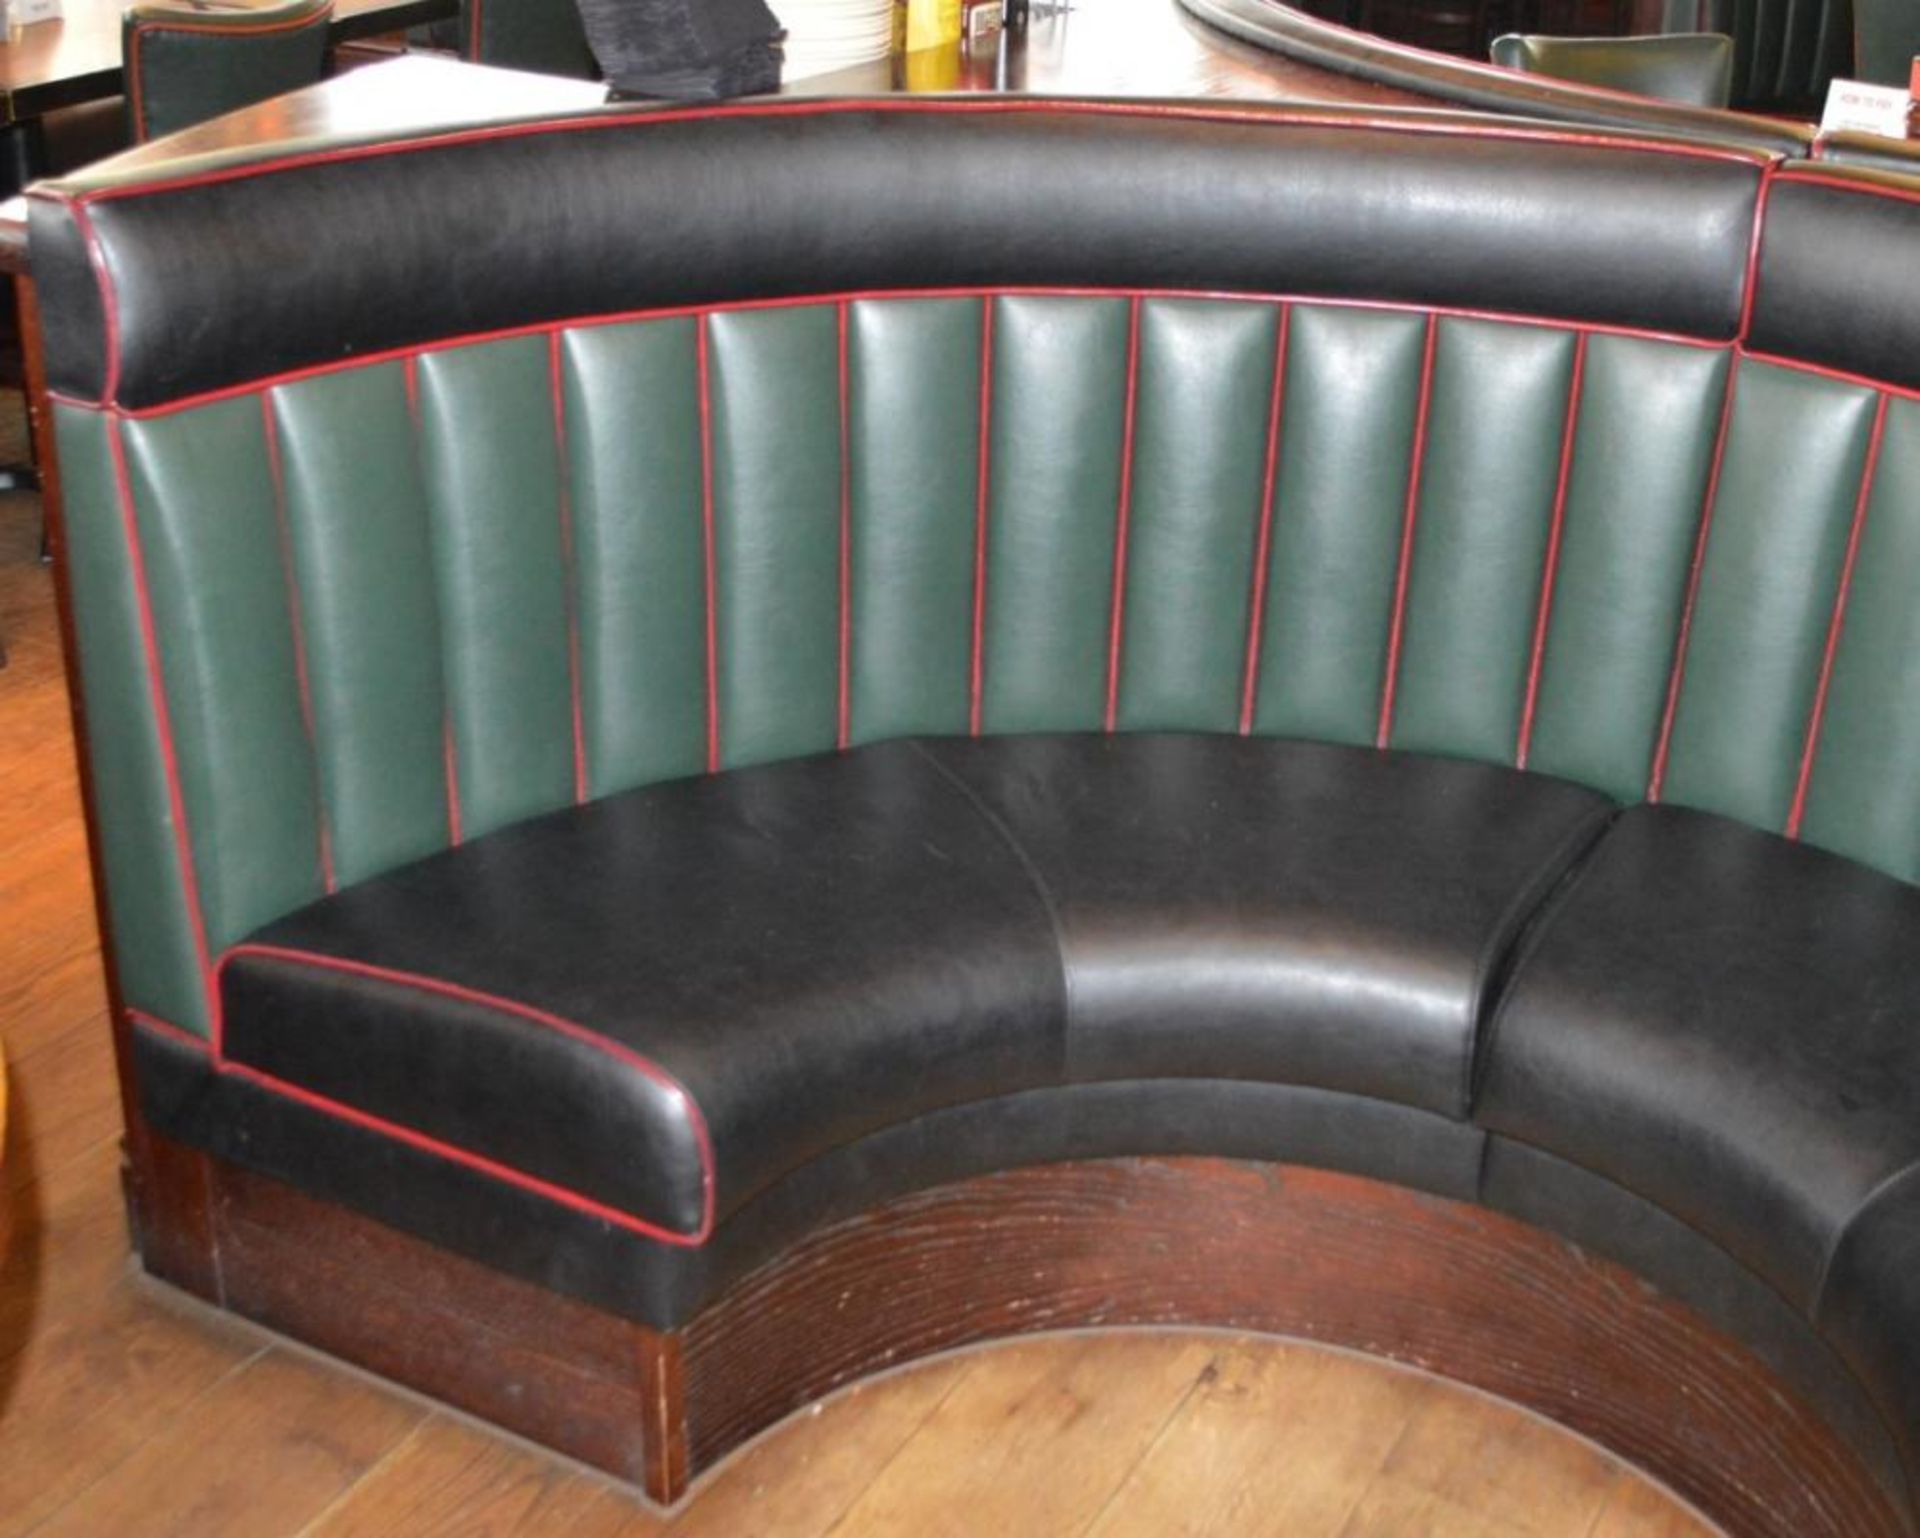 2 x Contemporary Half Circle Seating Booths - Pair of - Features a Leather Upholstery in Green and - Image 2 of 5